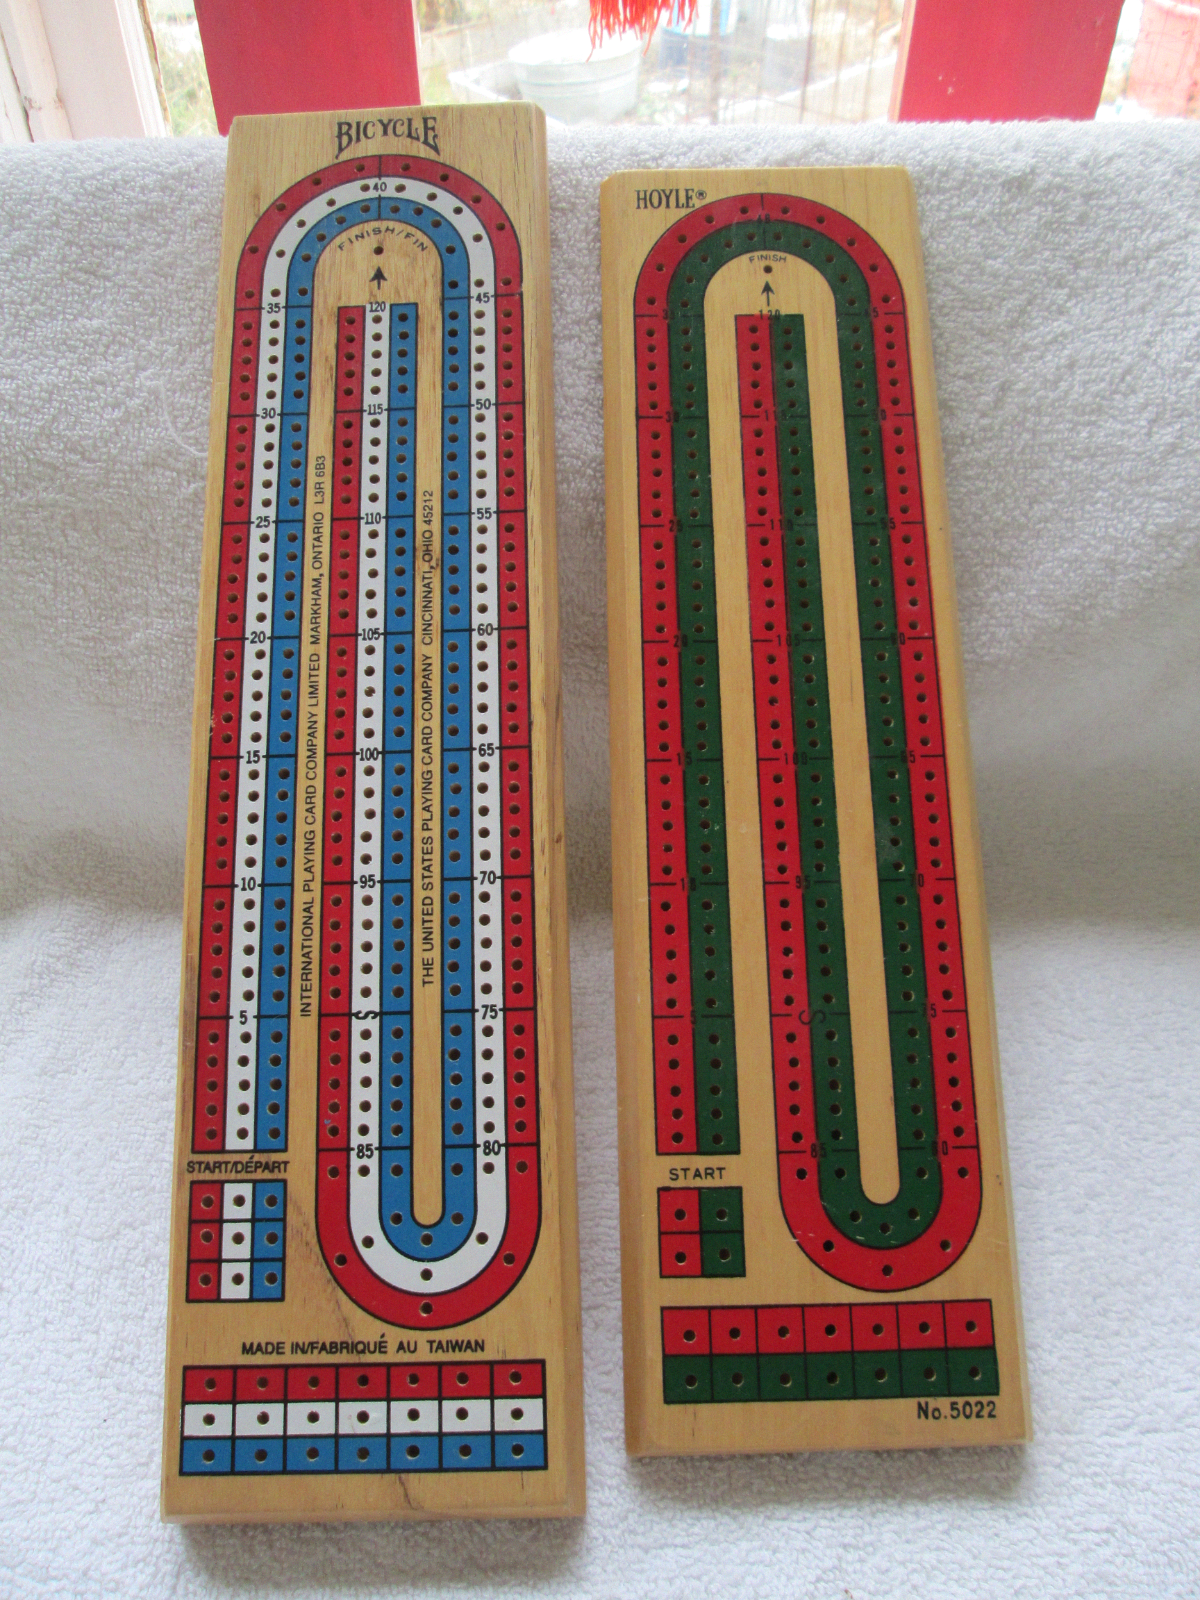 Two cribbage boards Hoyle #5022 and Bicycle (Taiwan), no boxes - $15.00